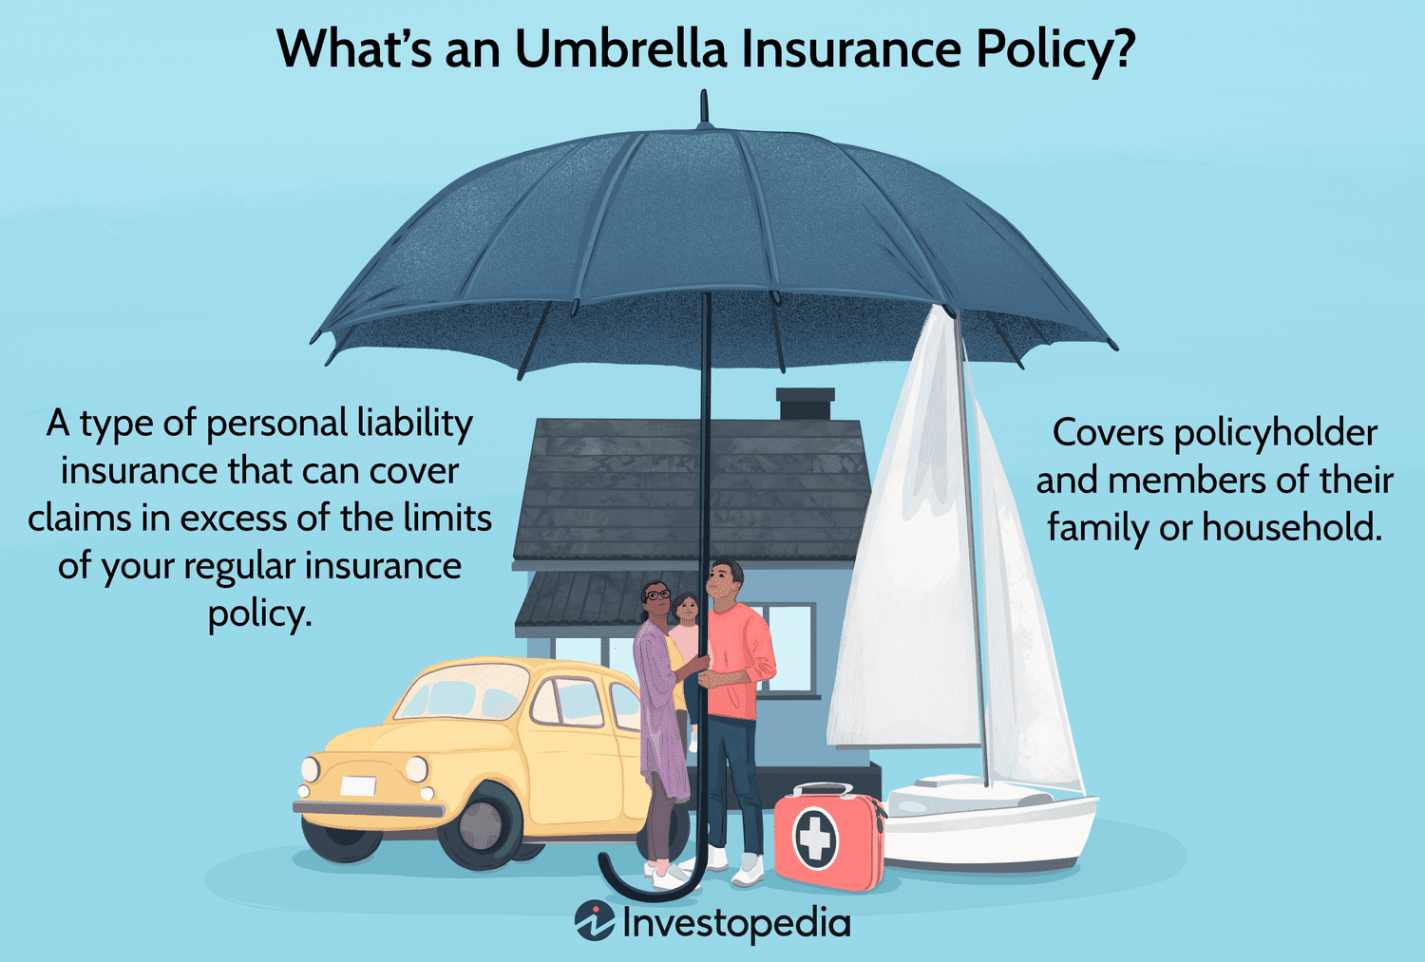 an umbrella policy is designed to cover Bulan 4 How an Umbrella Insurance Policy Works